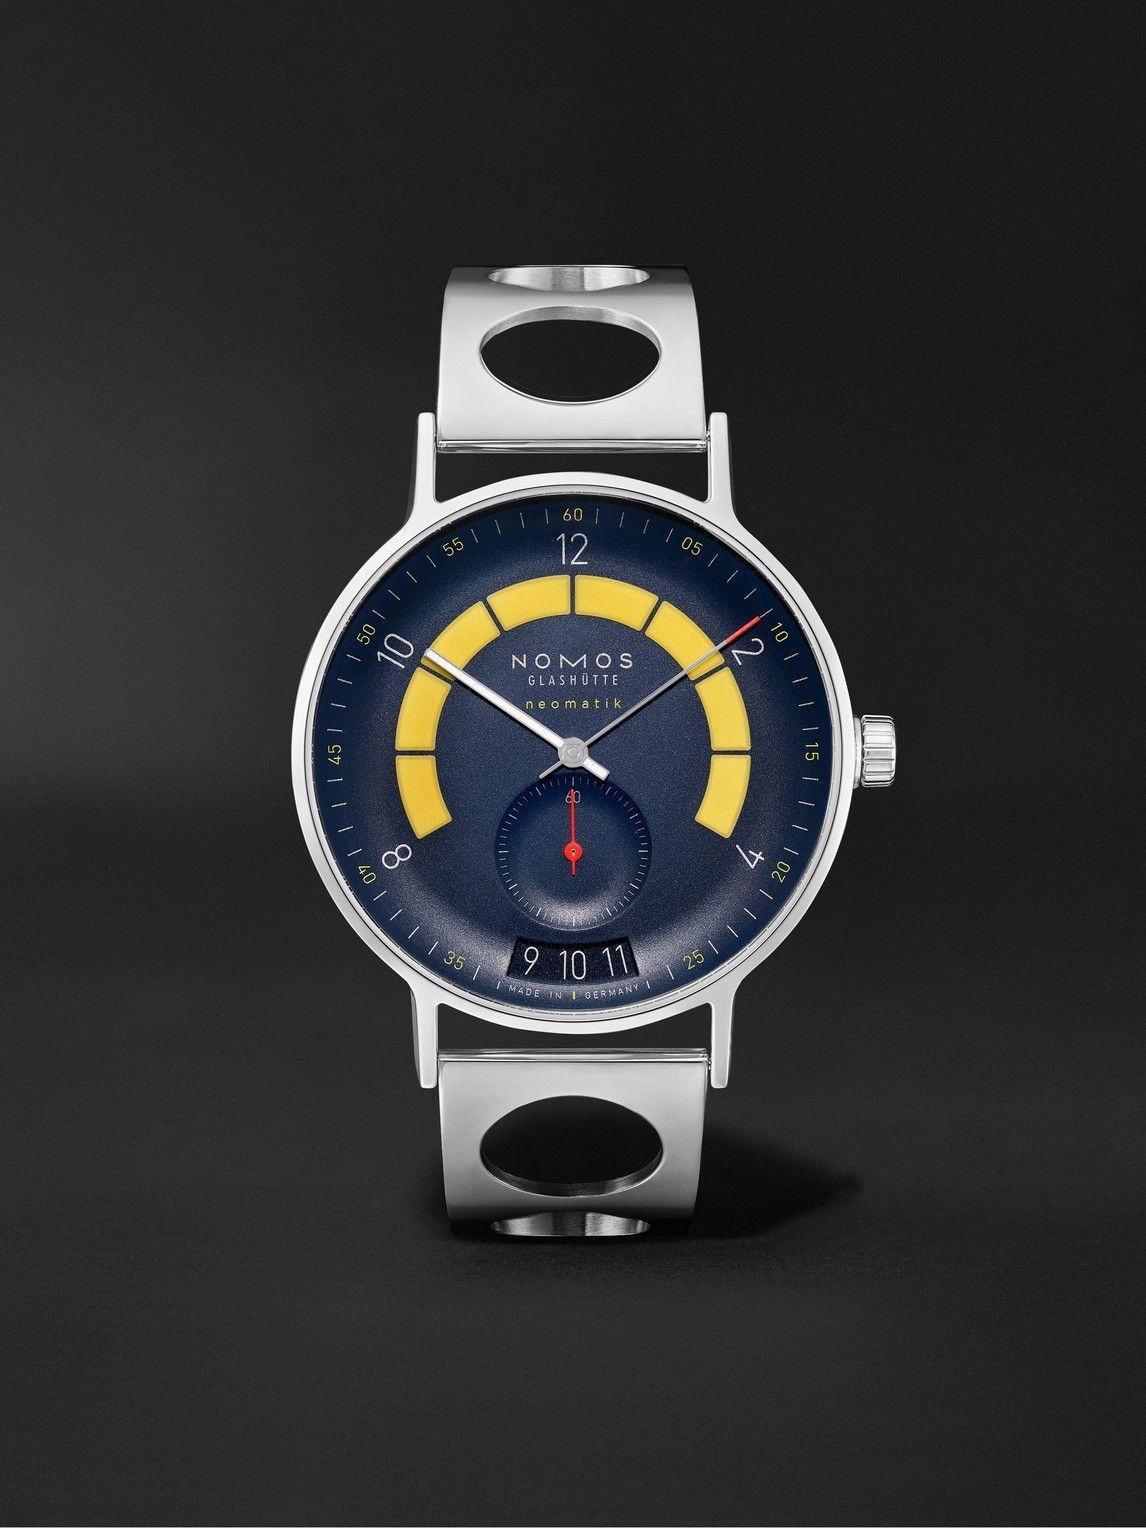 Photo: NOMOS Glashütte - Autobahn Director's Cut A7 Limited Edition Automatic 41mm Stainless Steel Watch, Ref. No. 1301.S2